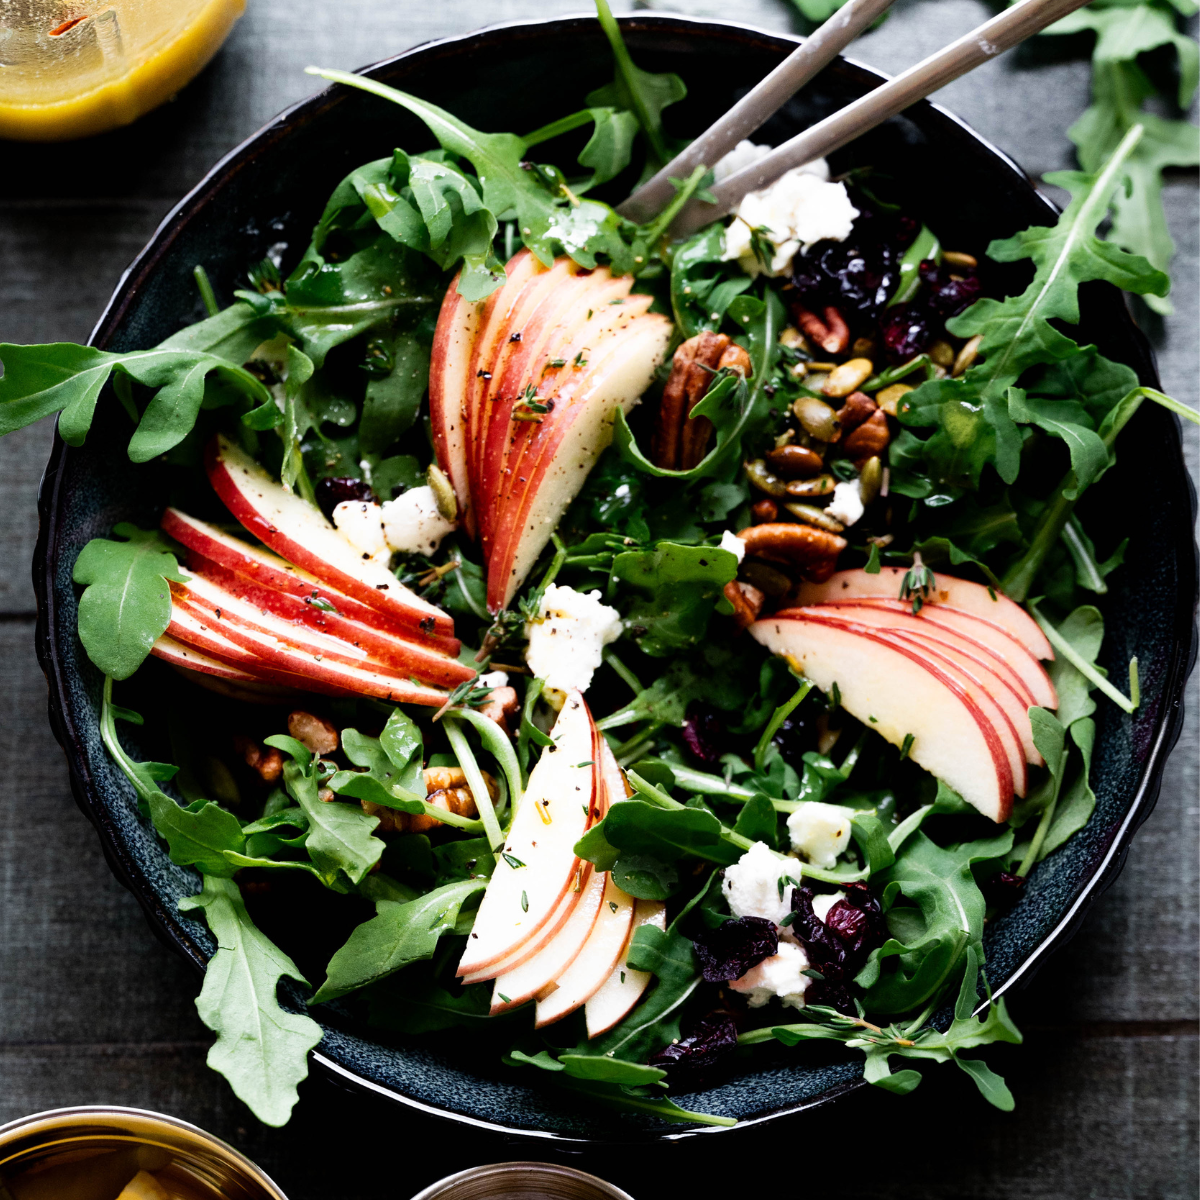 Overhead photo of apple salad with Arugula on a wooden background.  